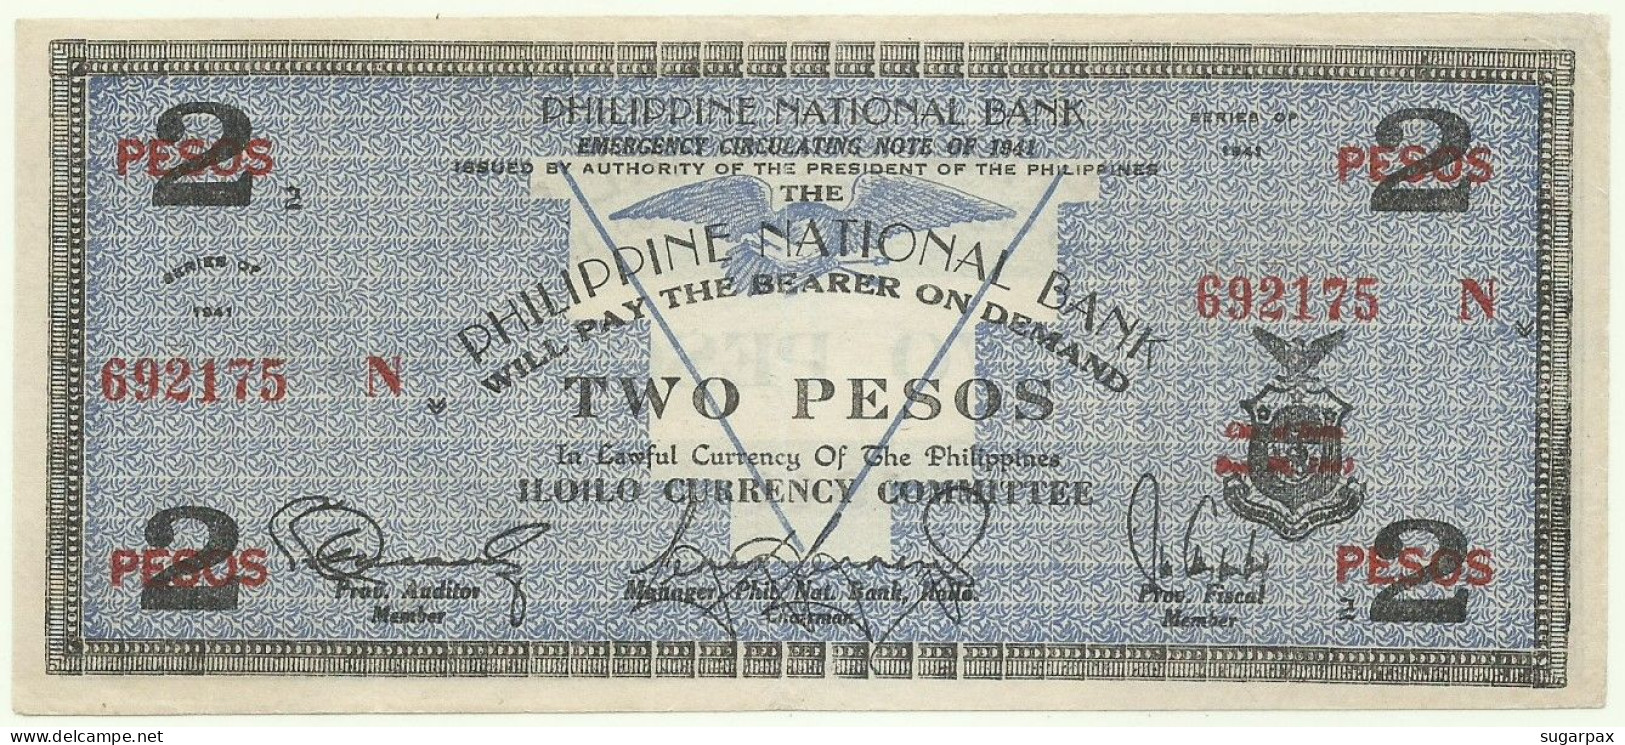 PHILIPPINES - 2 Pesos - 1941 - Pick S 306 - Serie N - ILOILO Currency Committee - Filipinas